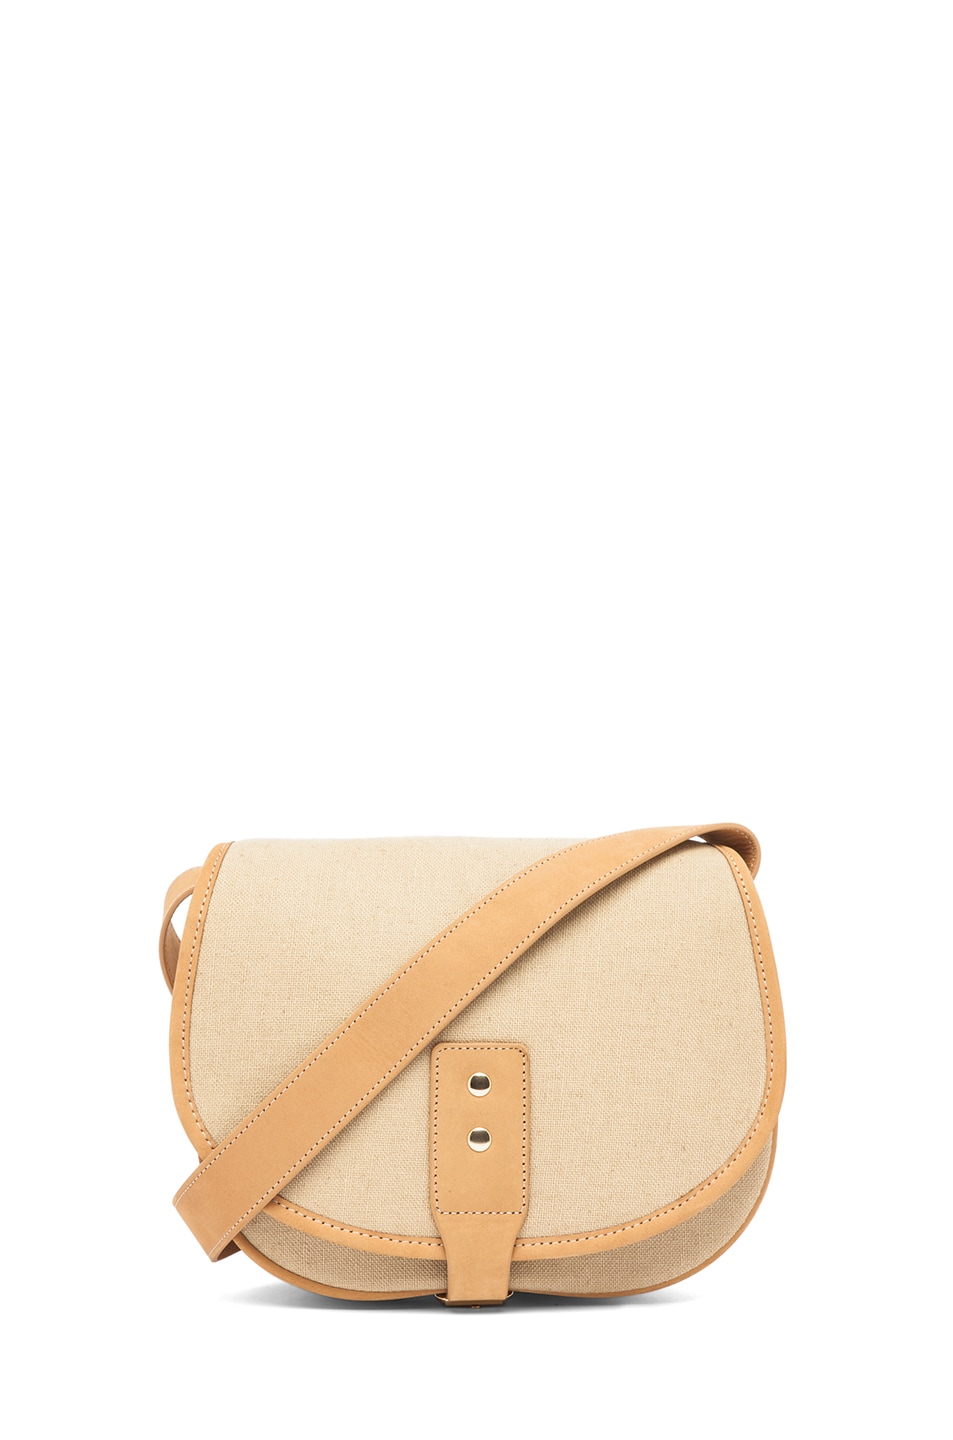 Image 1 of A.P.C. Toile Coton Sac Besace in Beige